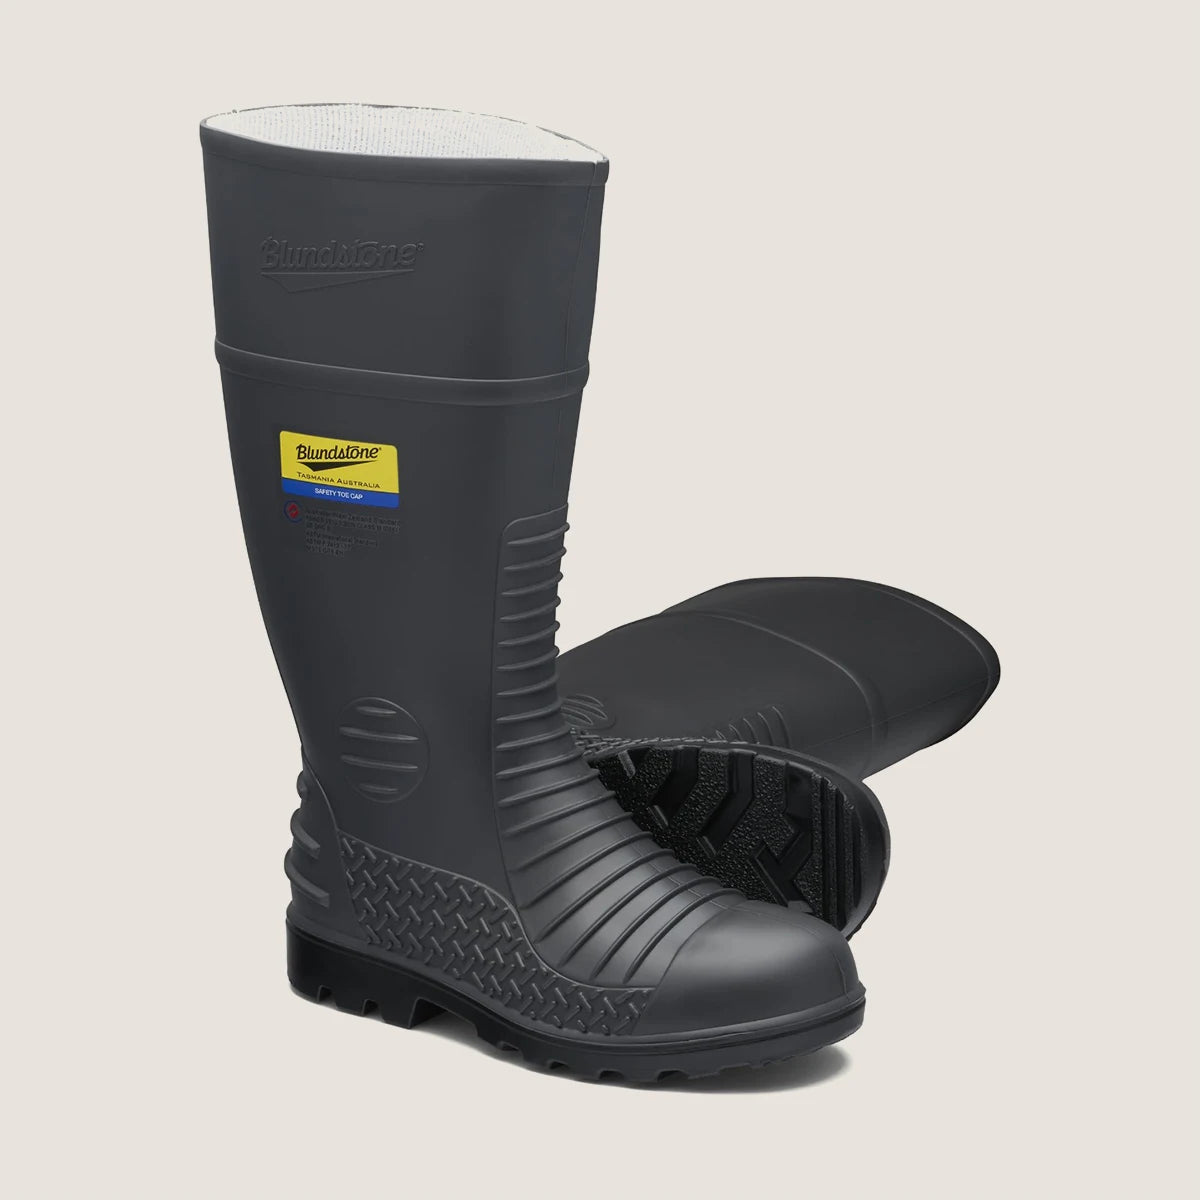 Blundstone 025 Safety Steel Toe Gumboots